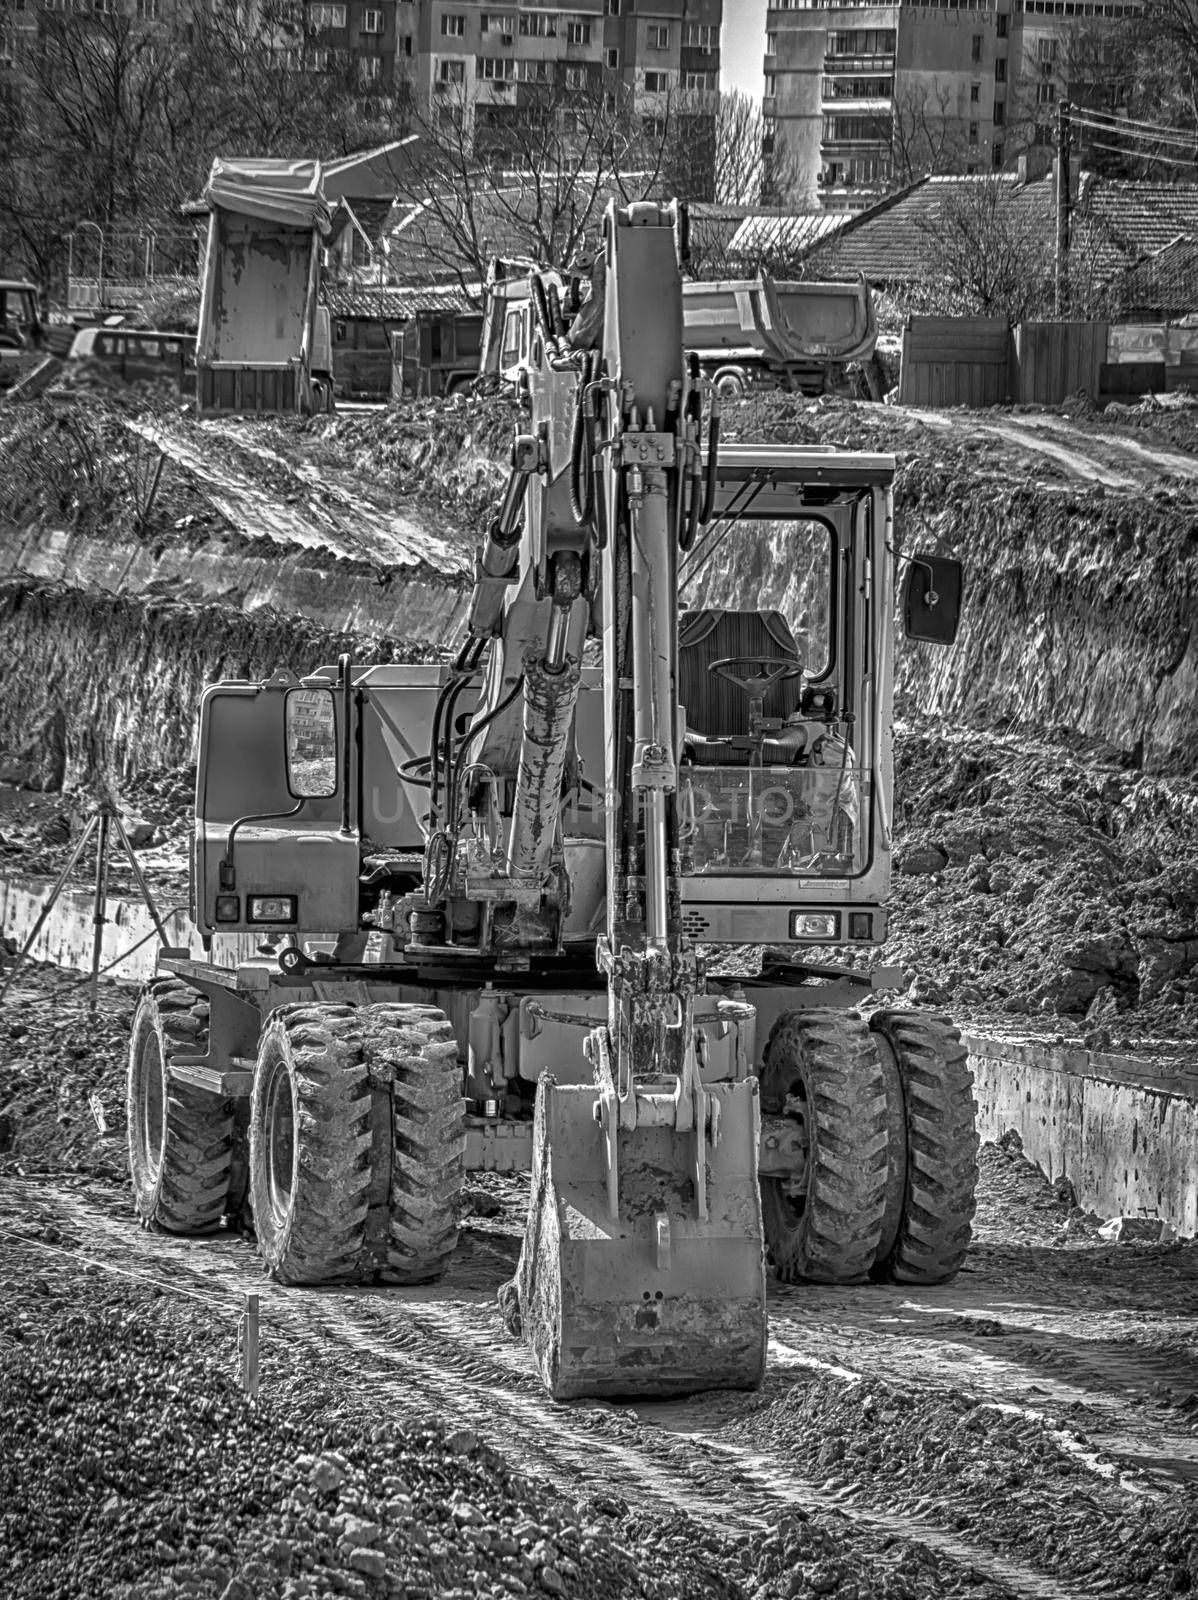 Amazing black and white view of the stopped excavator at the construction site